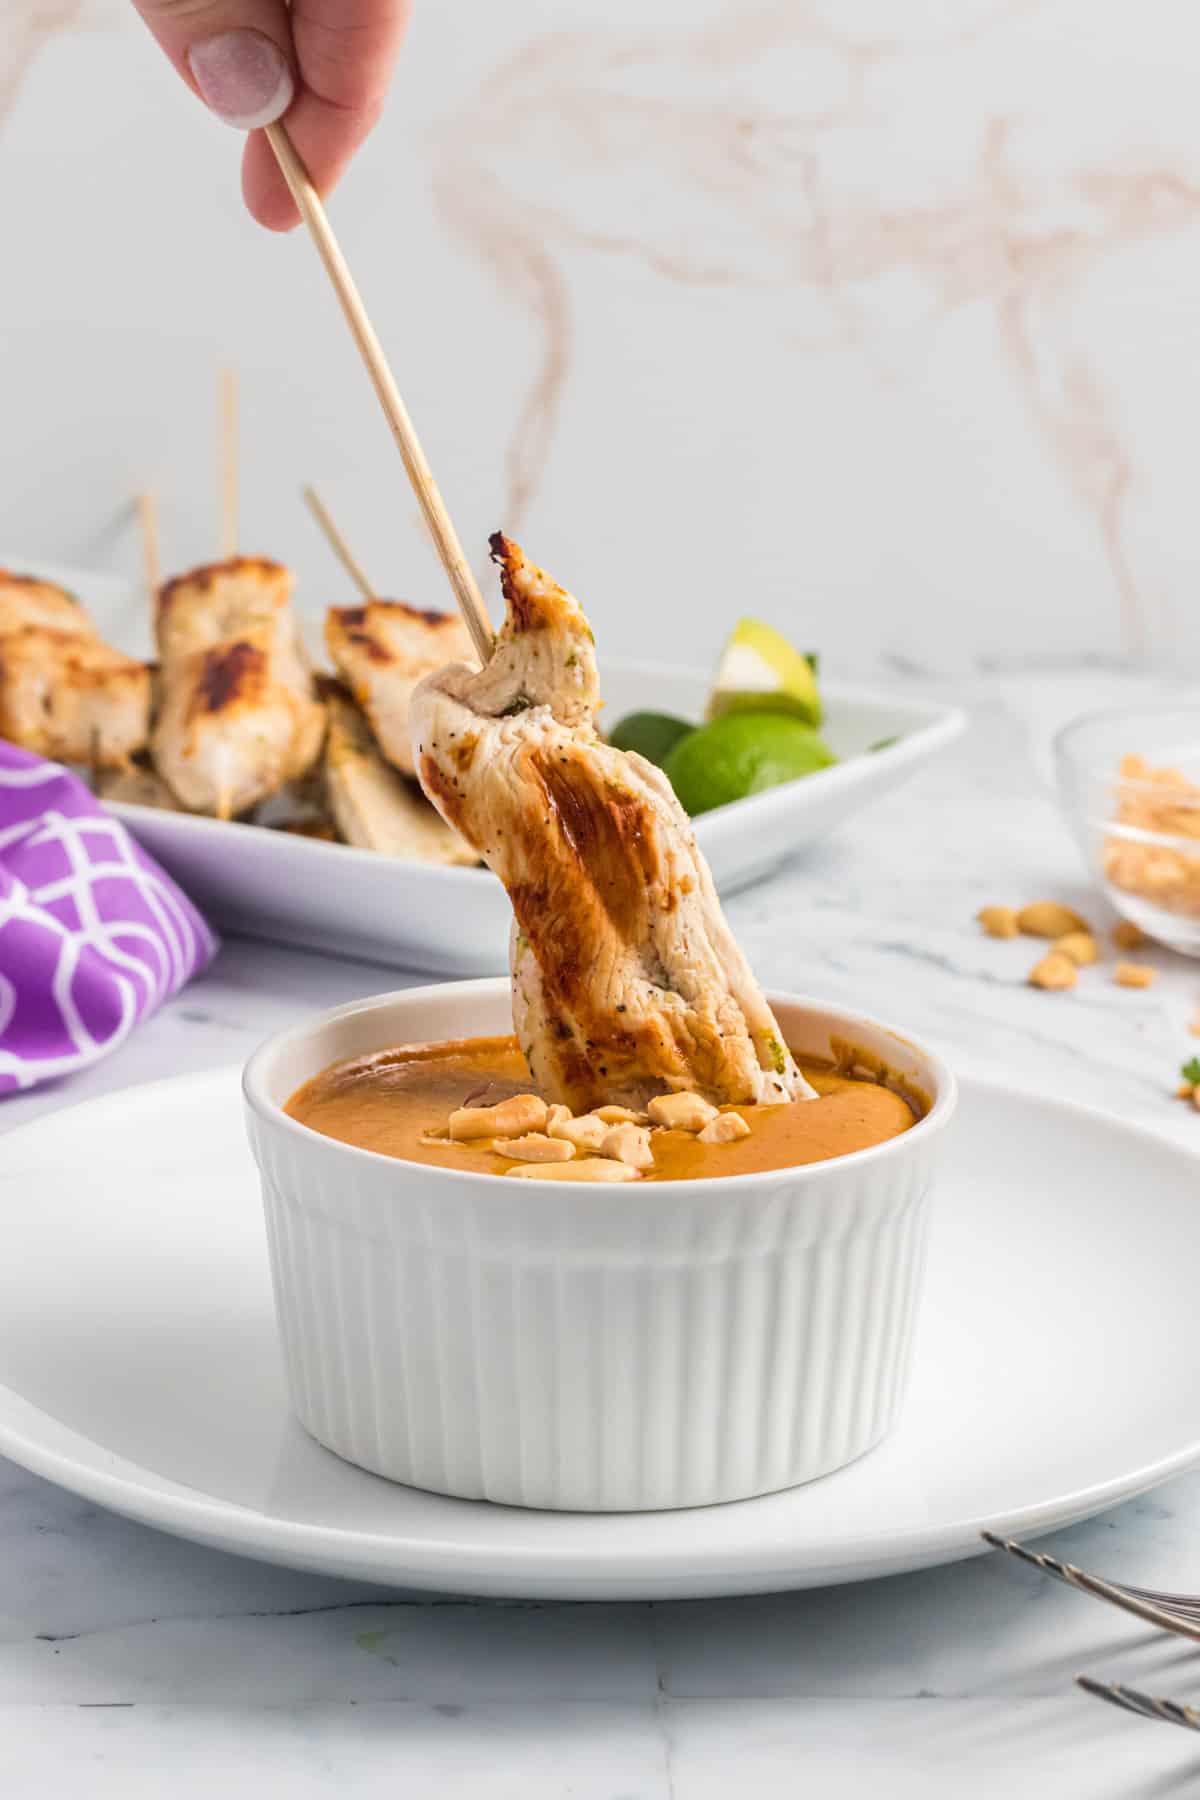 Grilled chicken on a skewer is being dipped into a cup of peanut sauce.